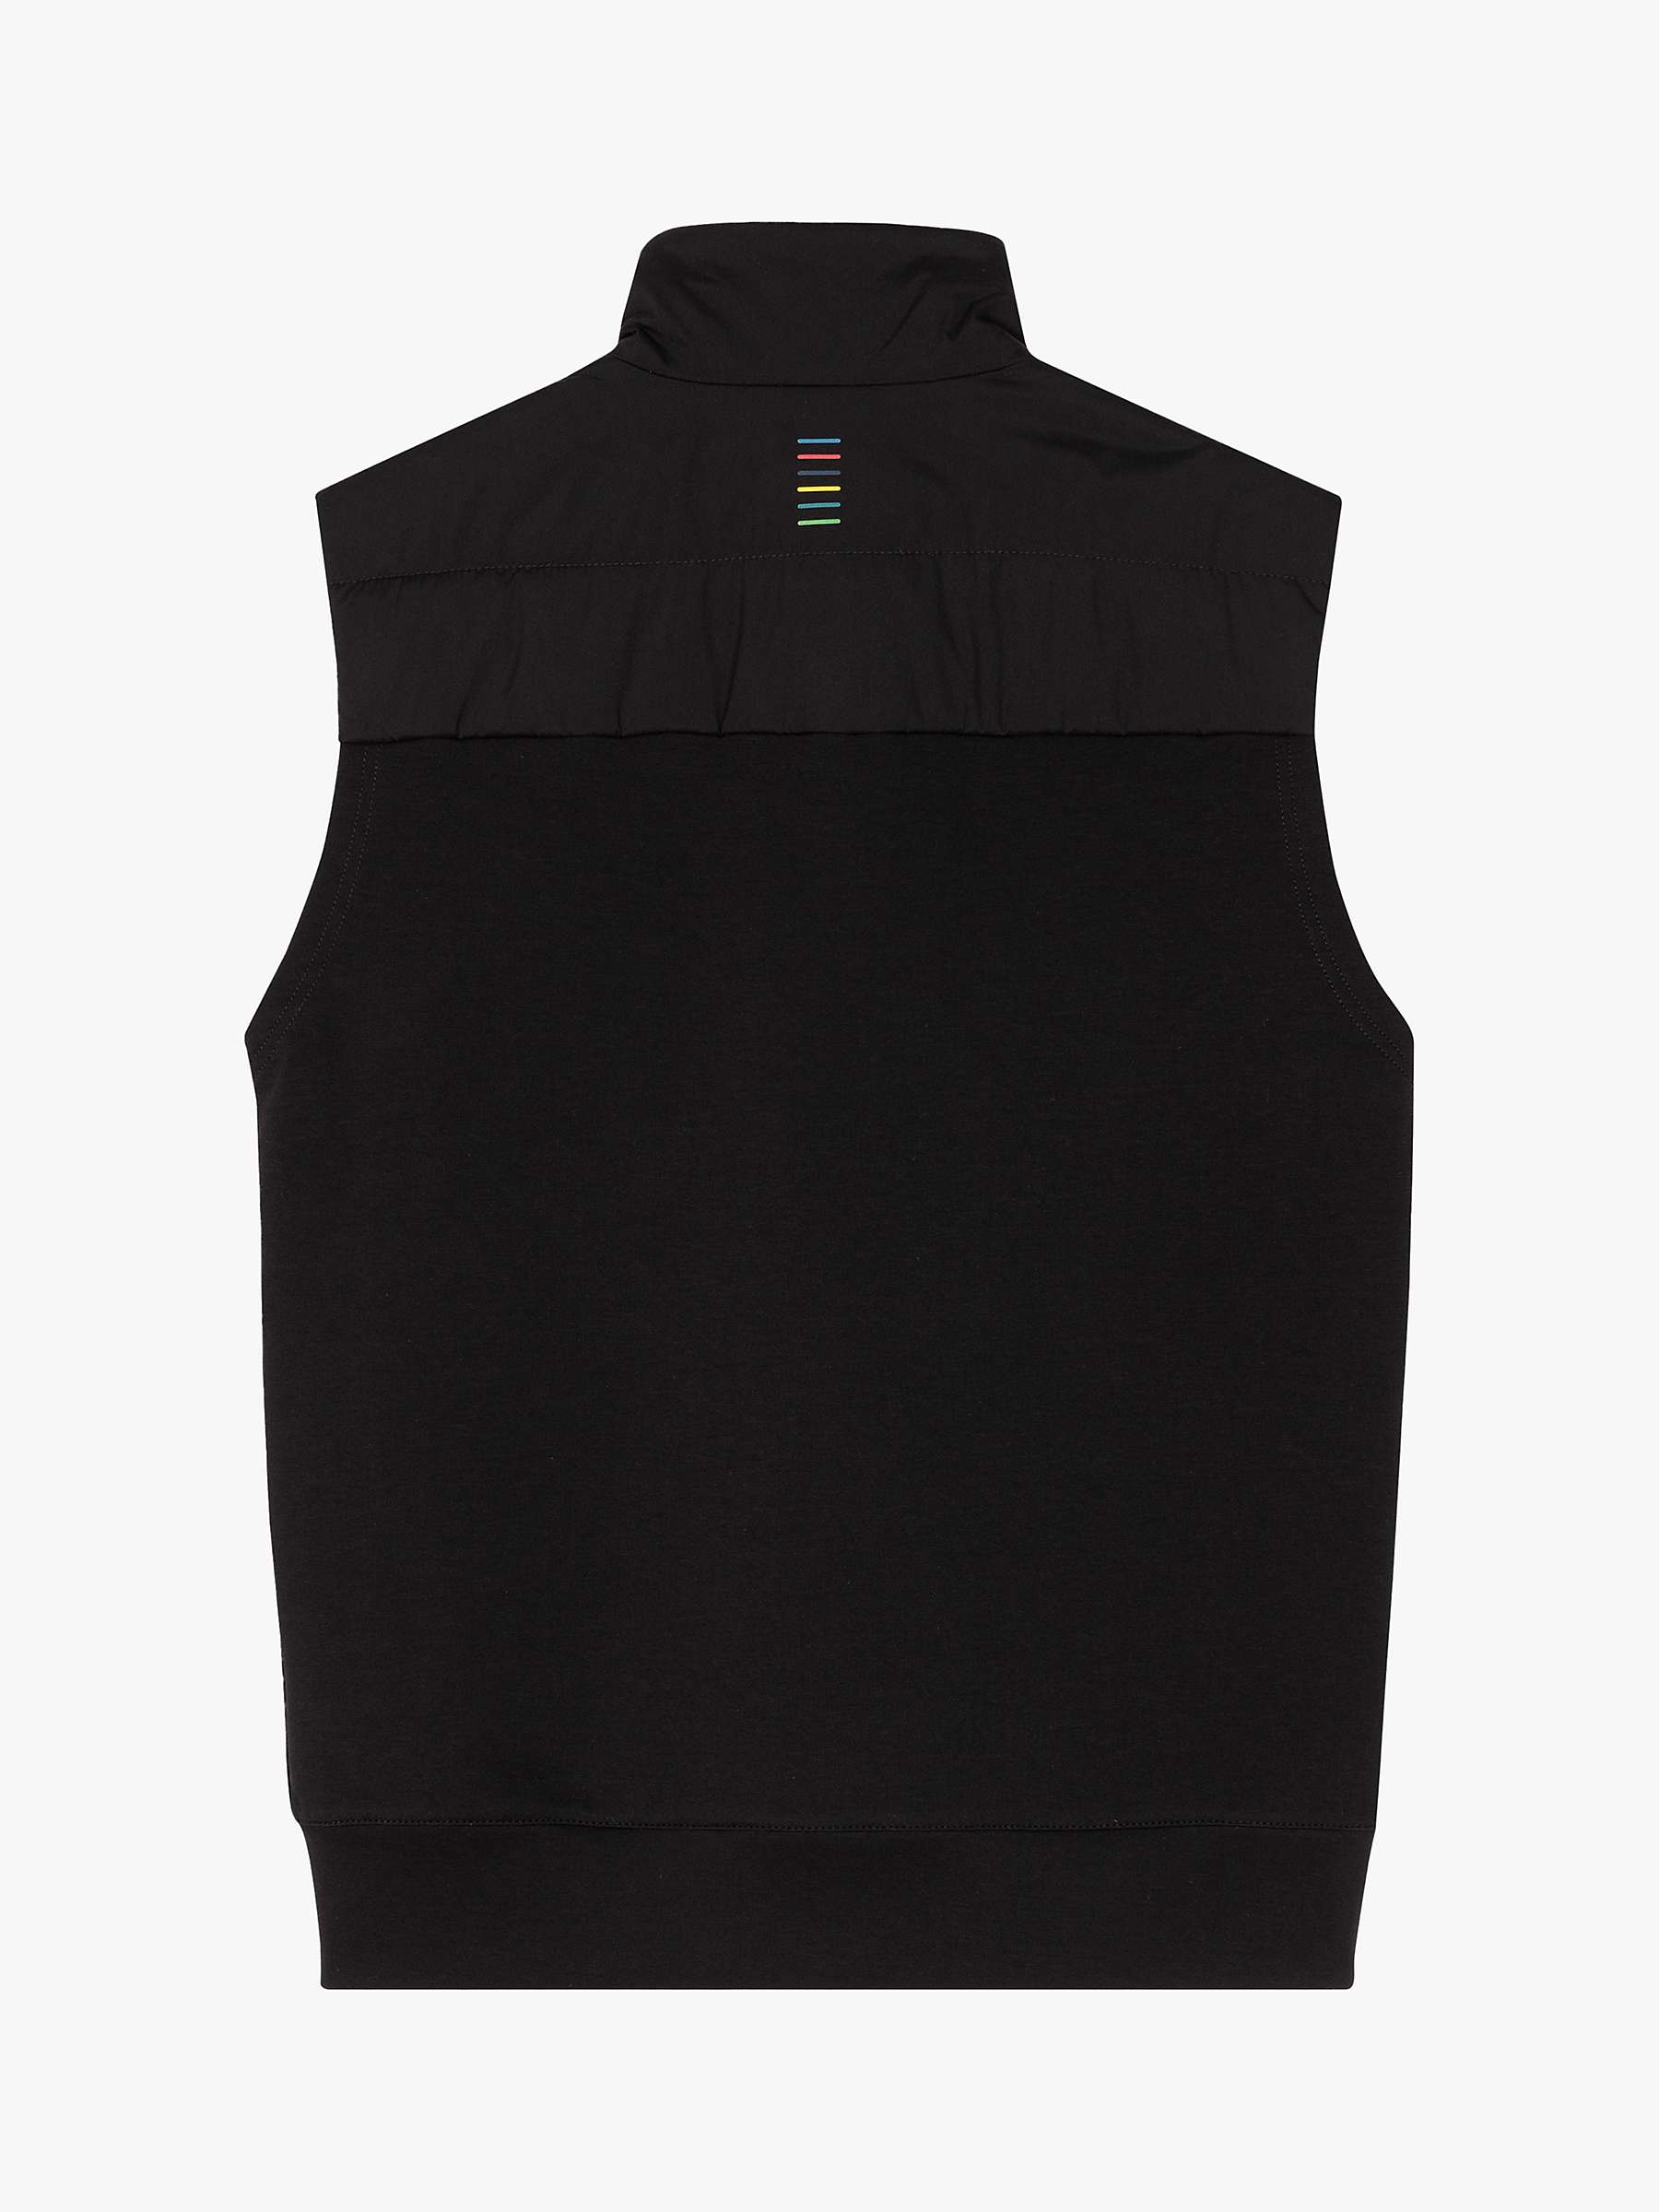 Buy Paul Smith Lightweight Quilted Gilet, Black Online at johnlewis.com